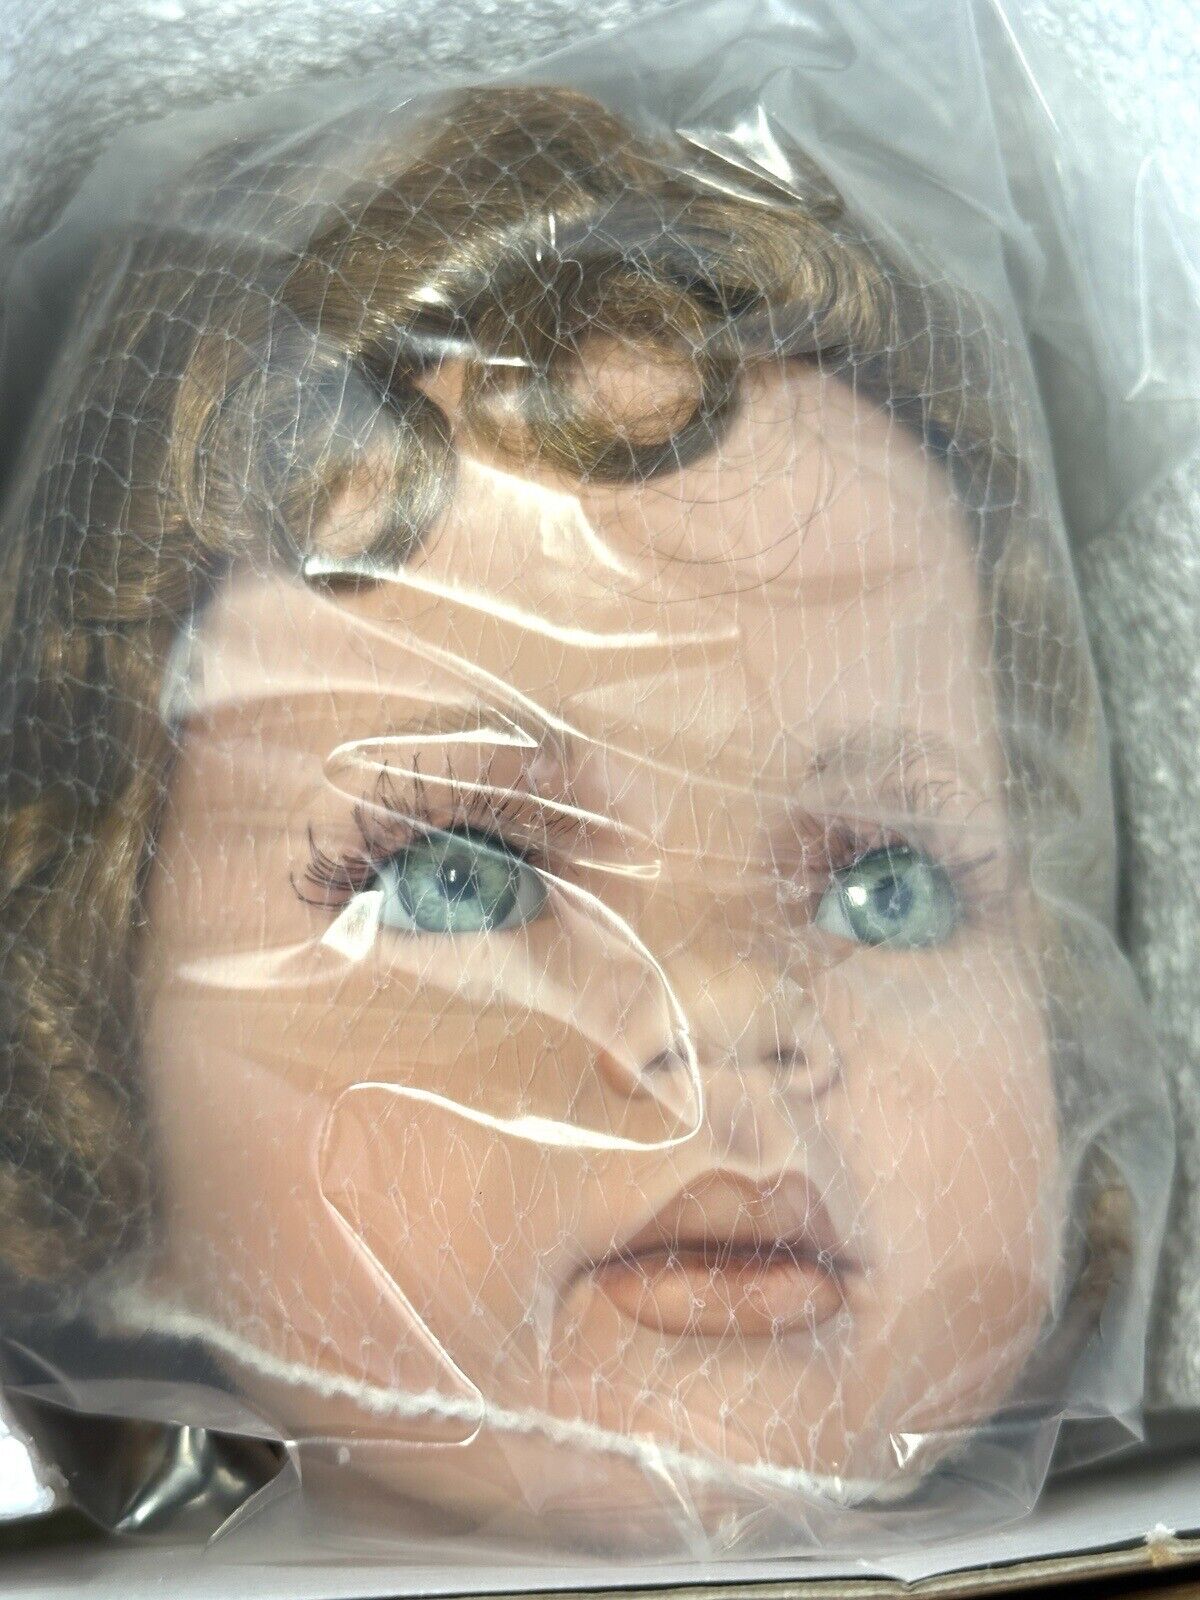 Collectible Lifelike Porcelain Doll Shannon by Donna RuBert Rustie LE 1500 NRFB